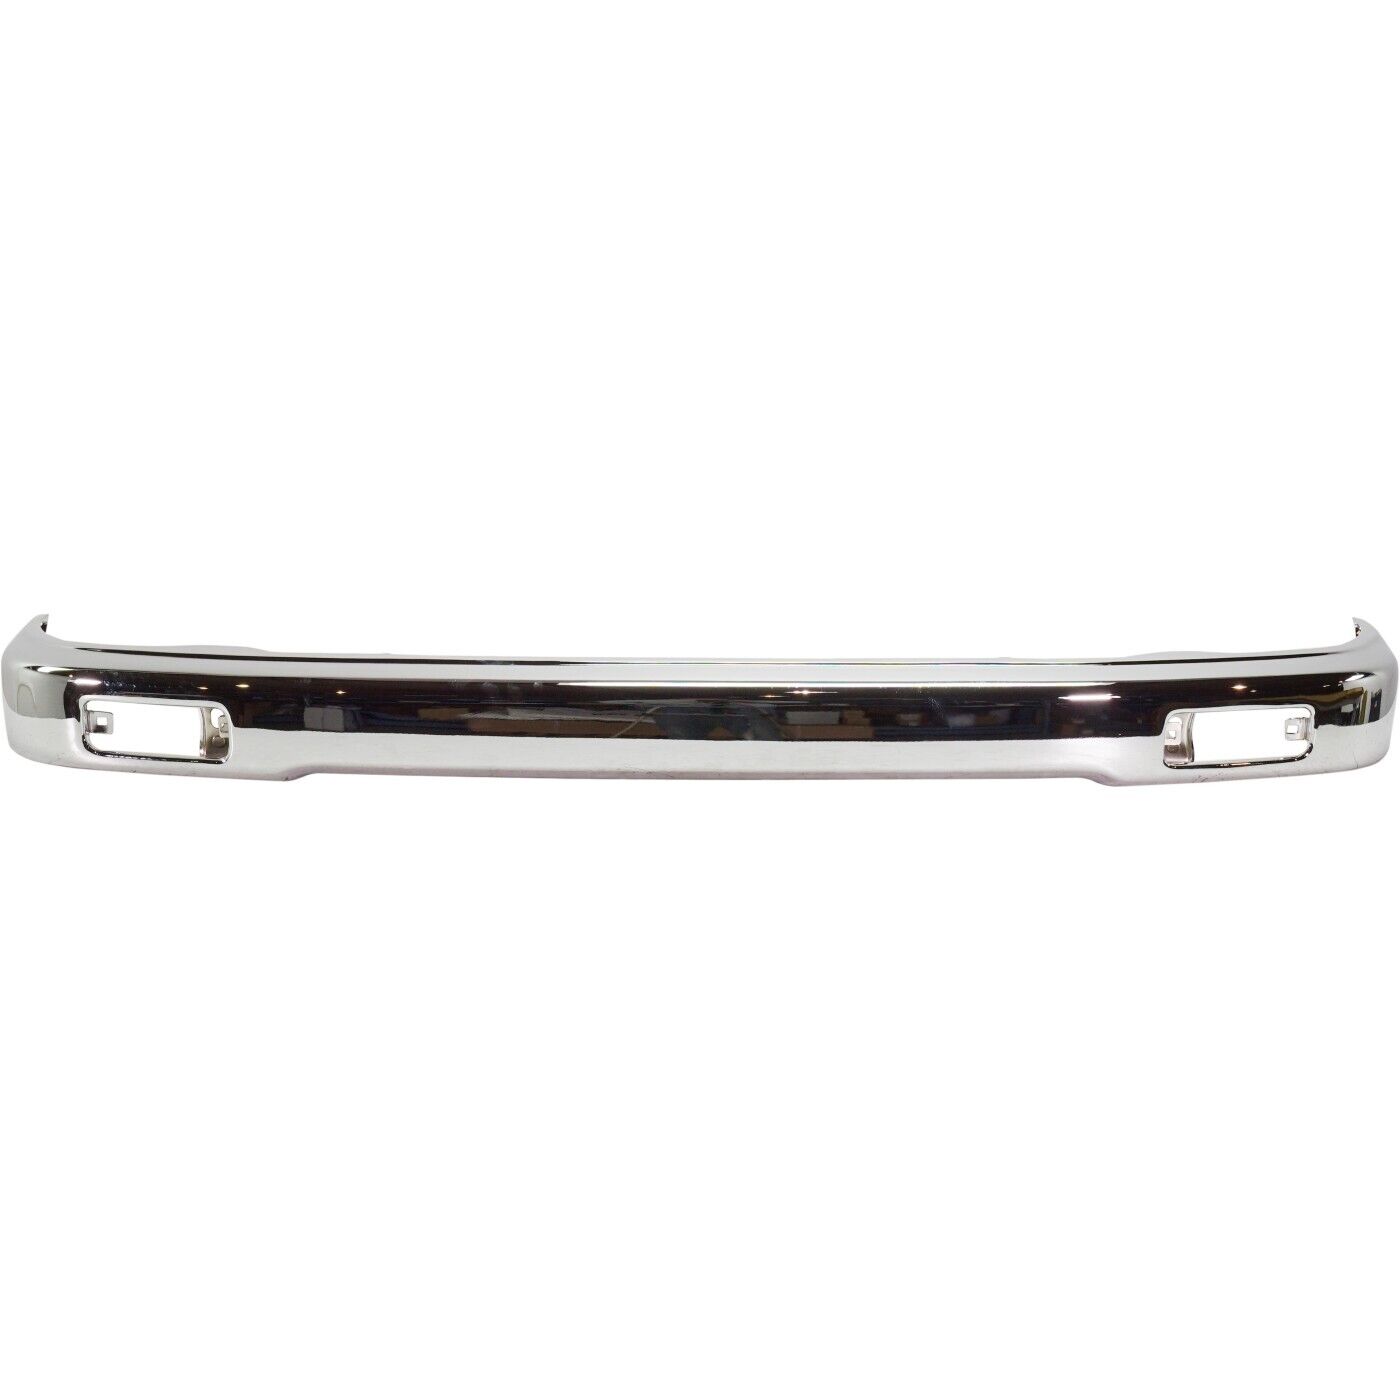 Bumper For 1993-1998 Toyota T100 Standard Cab Pickup Chrome Steel Front